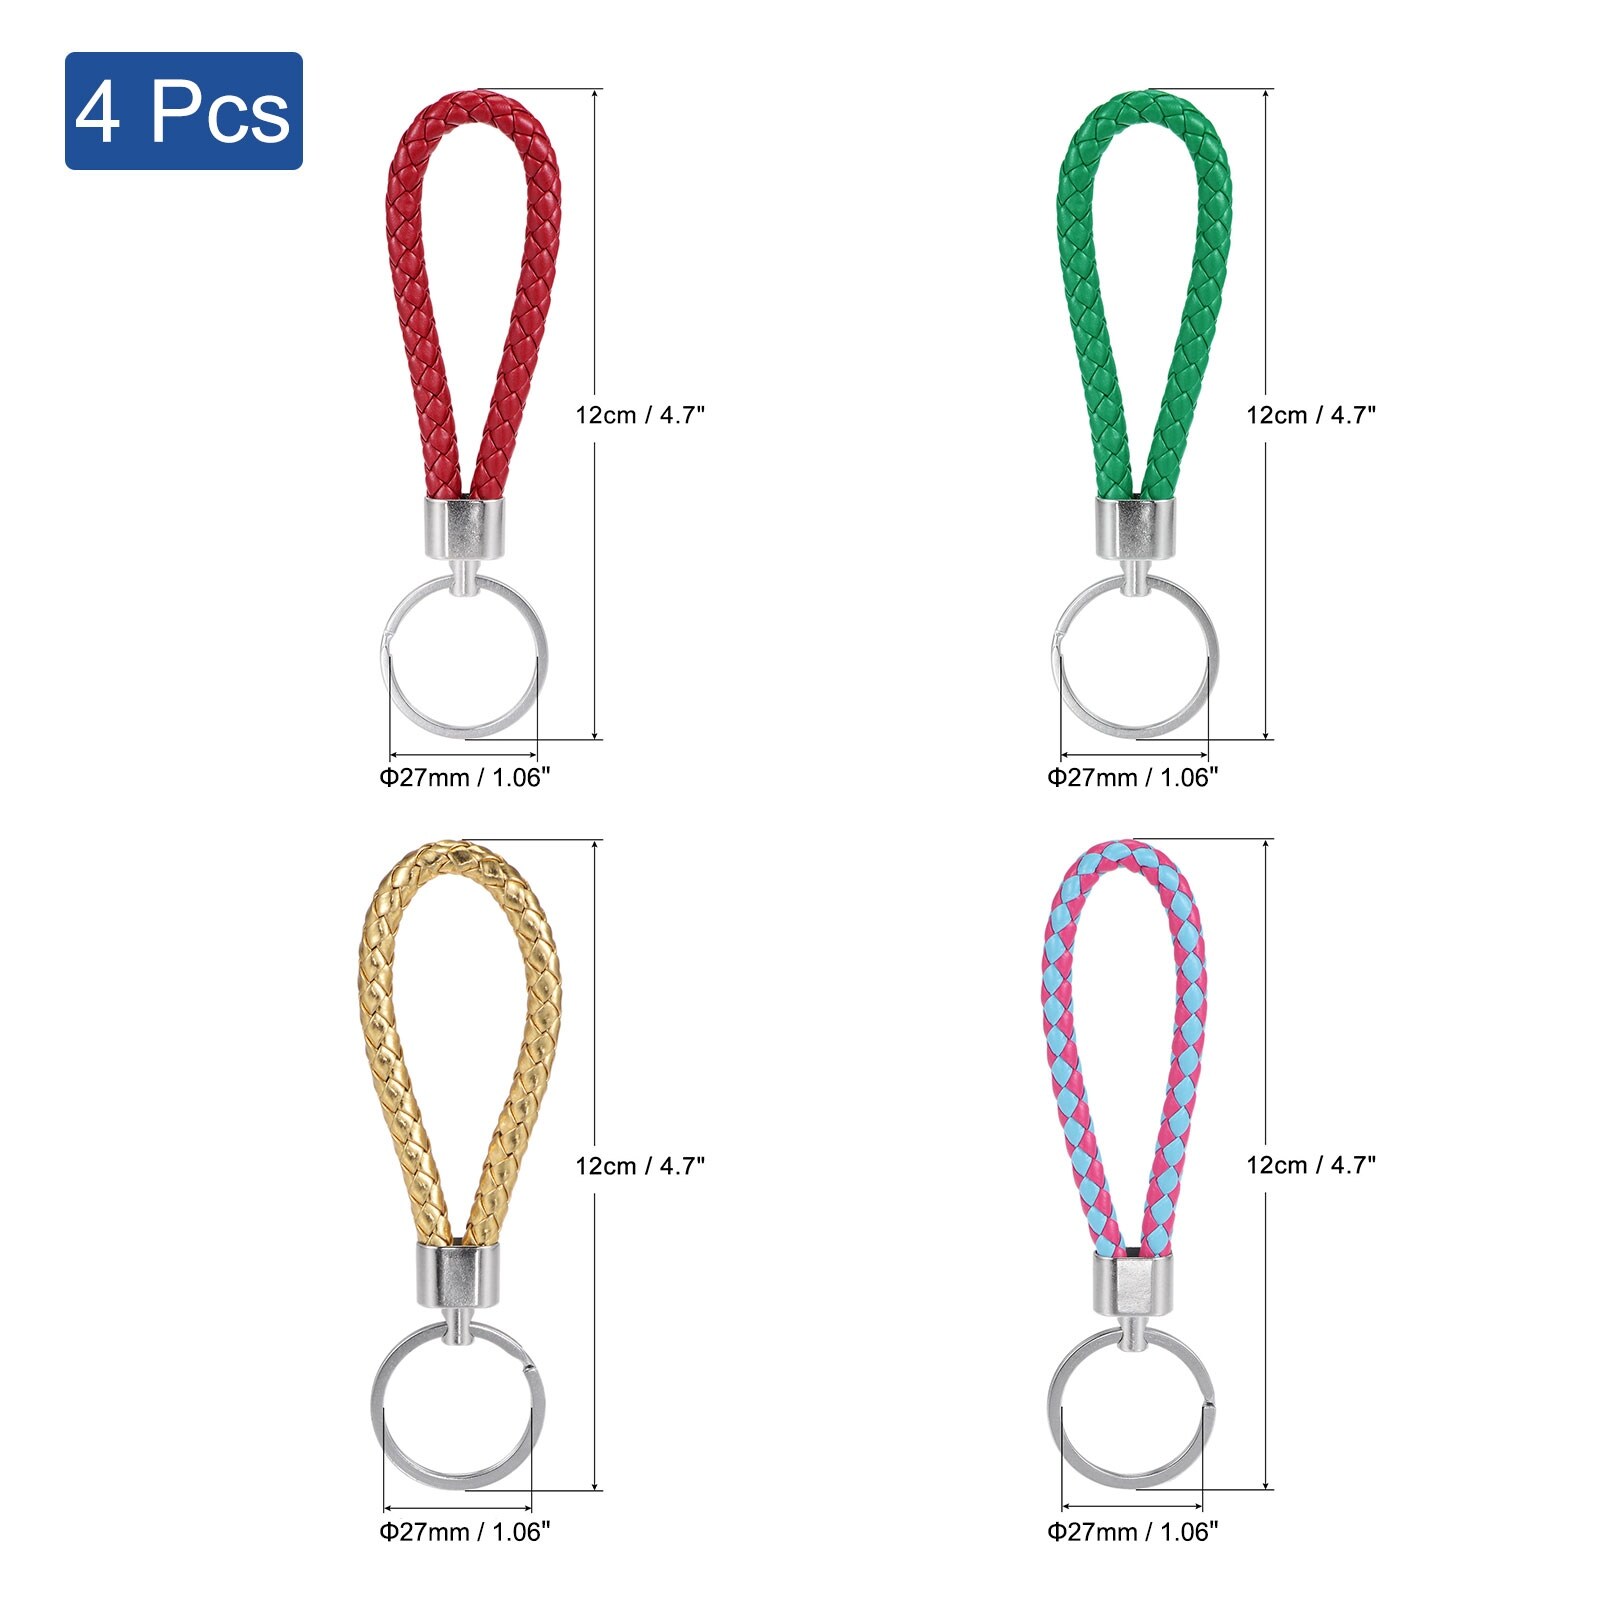  4pcs Braid Accessories Leather Material Lanyard